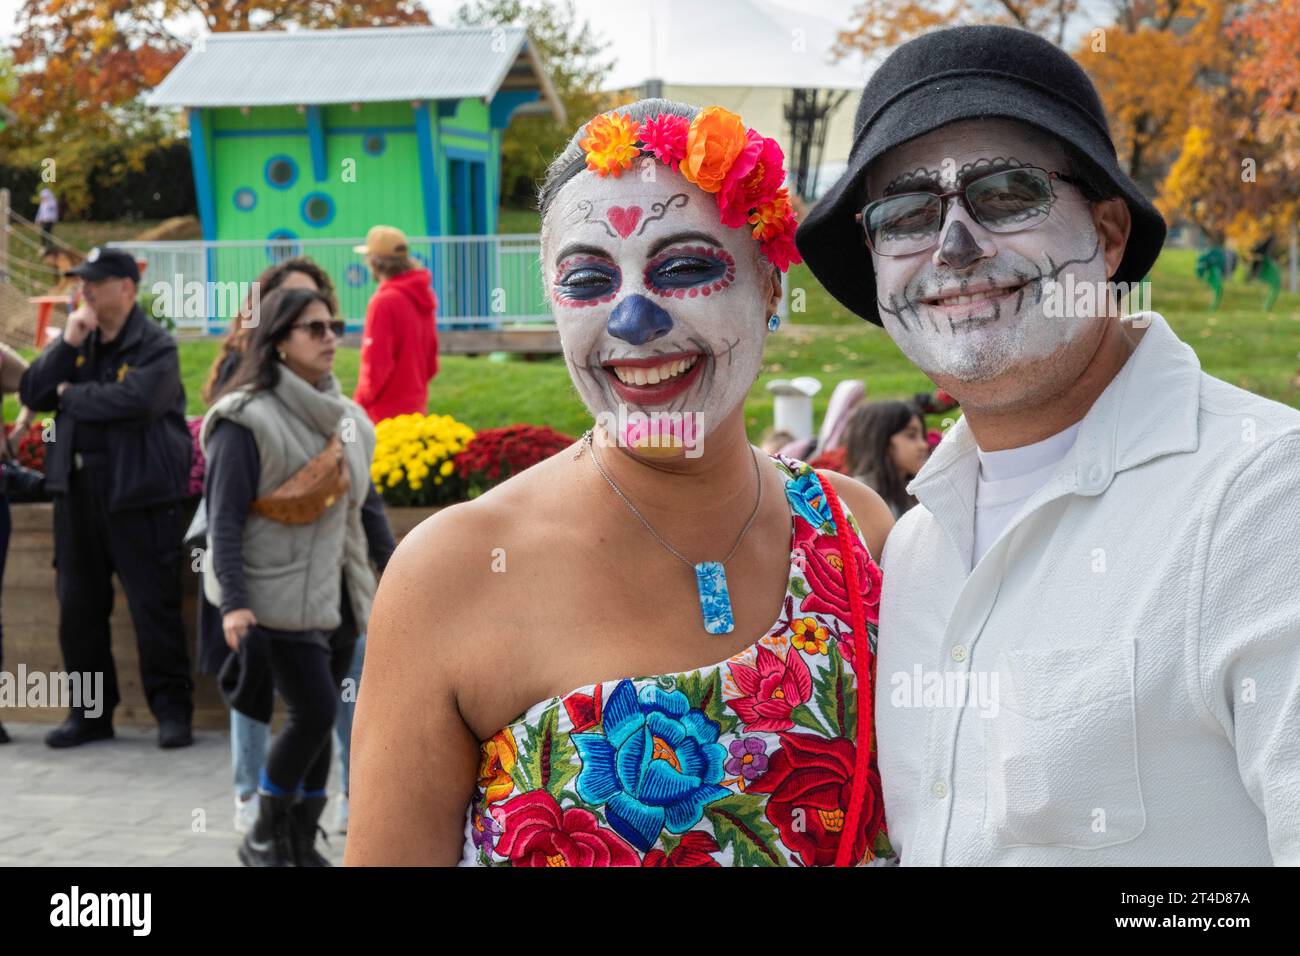 Detroit, Michigan - Day of the Dead celebration at Valade Park on the Detroit Riverfront. Some visitors painted their faces to honor the Mexican tradi Stock Photo